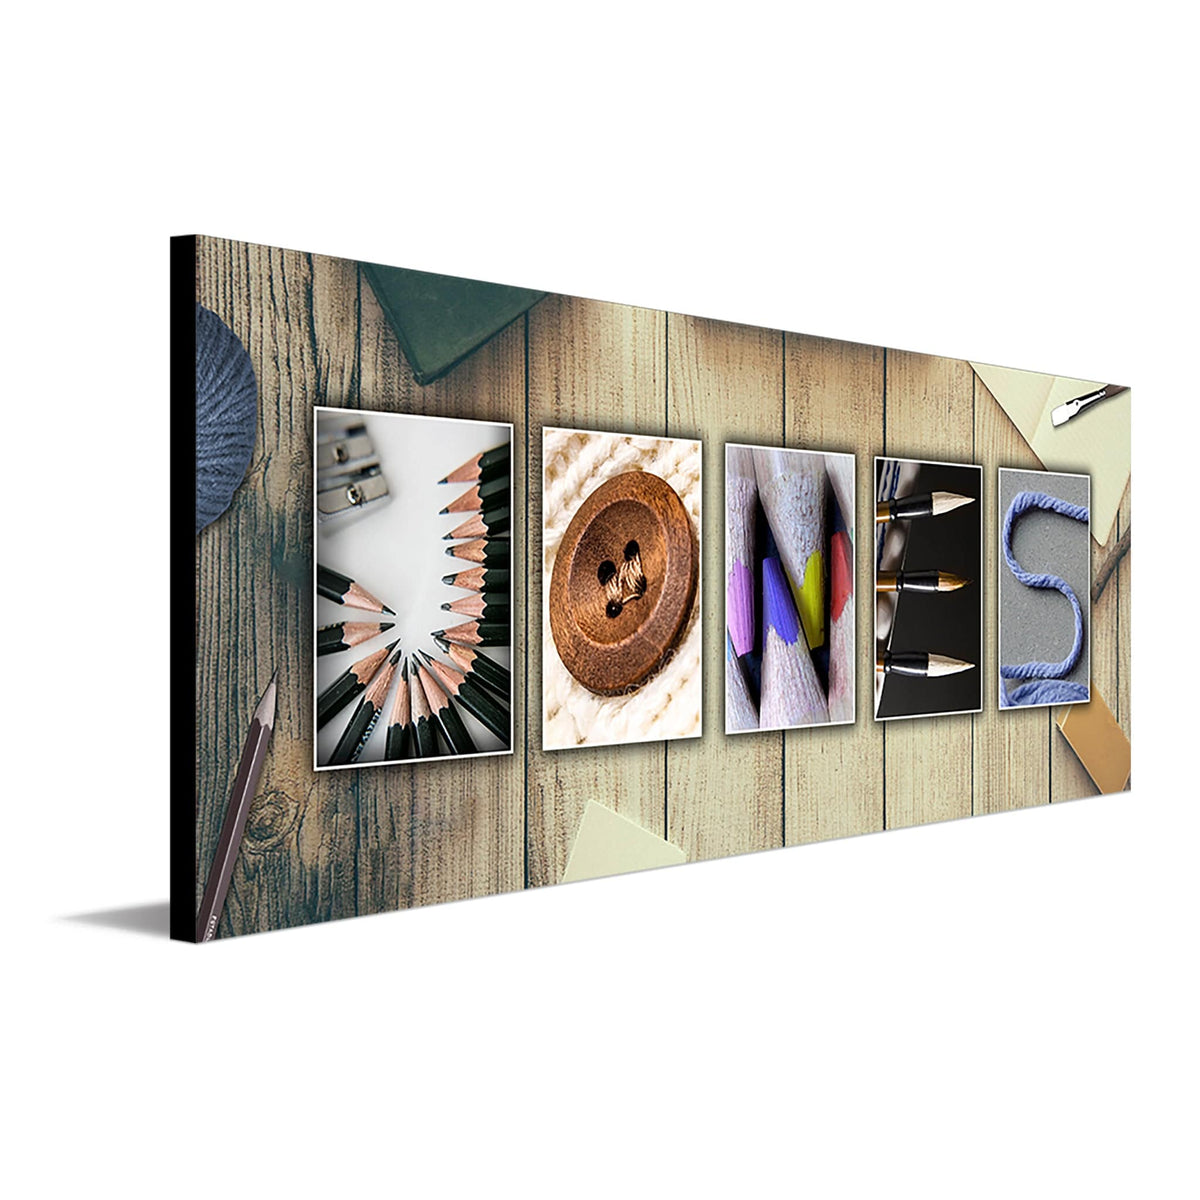 Personal-Prints Crafts &amp; Scrapbooking Personalized Name Art.